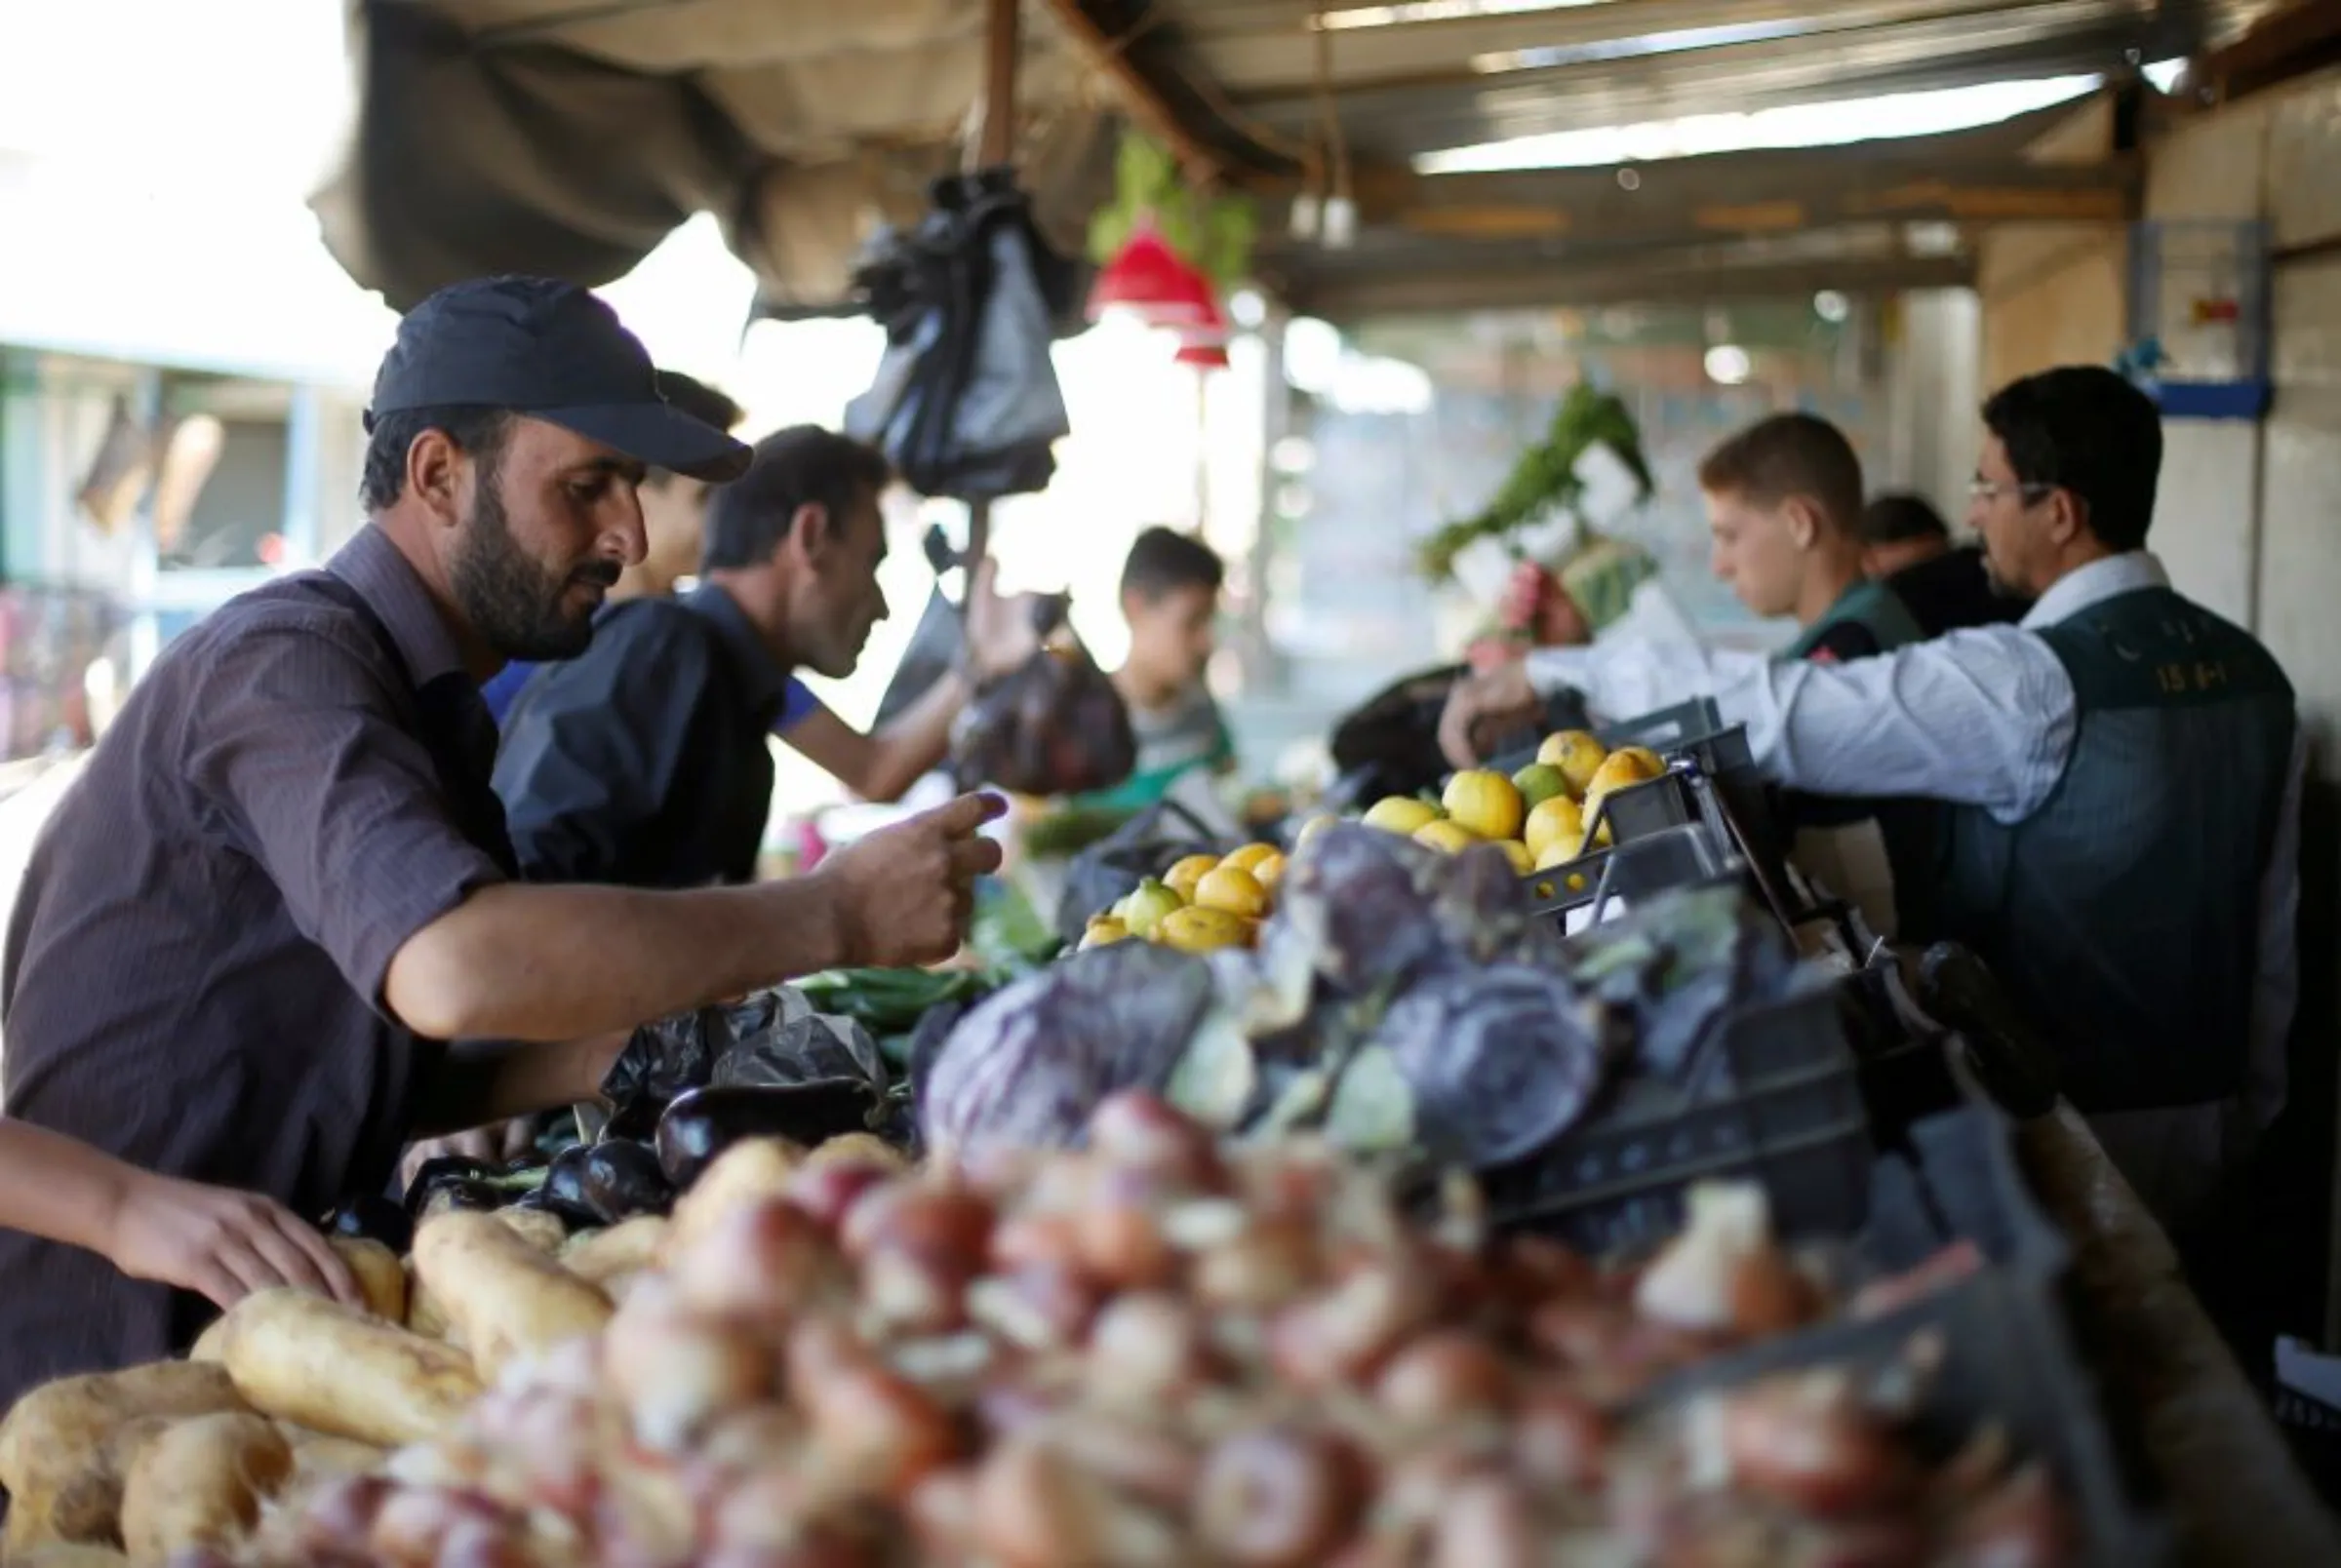 Syrian refugees buy vegetables at the main market, during the Muslim fasting month of Ramadan at the Al-Zaatari refugee camp in Mafraq, Jordan, near the border with Syria June 1, 2017